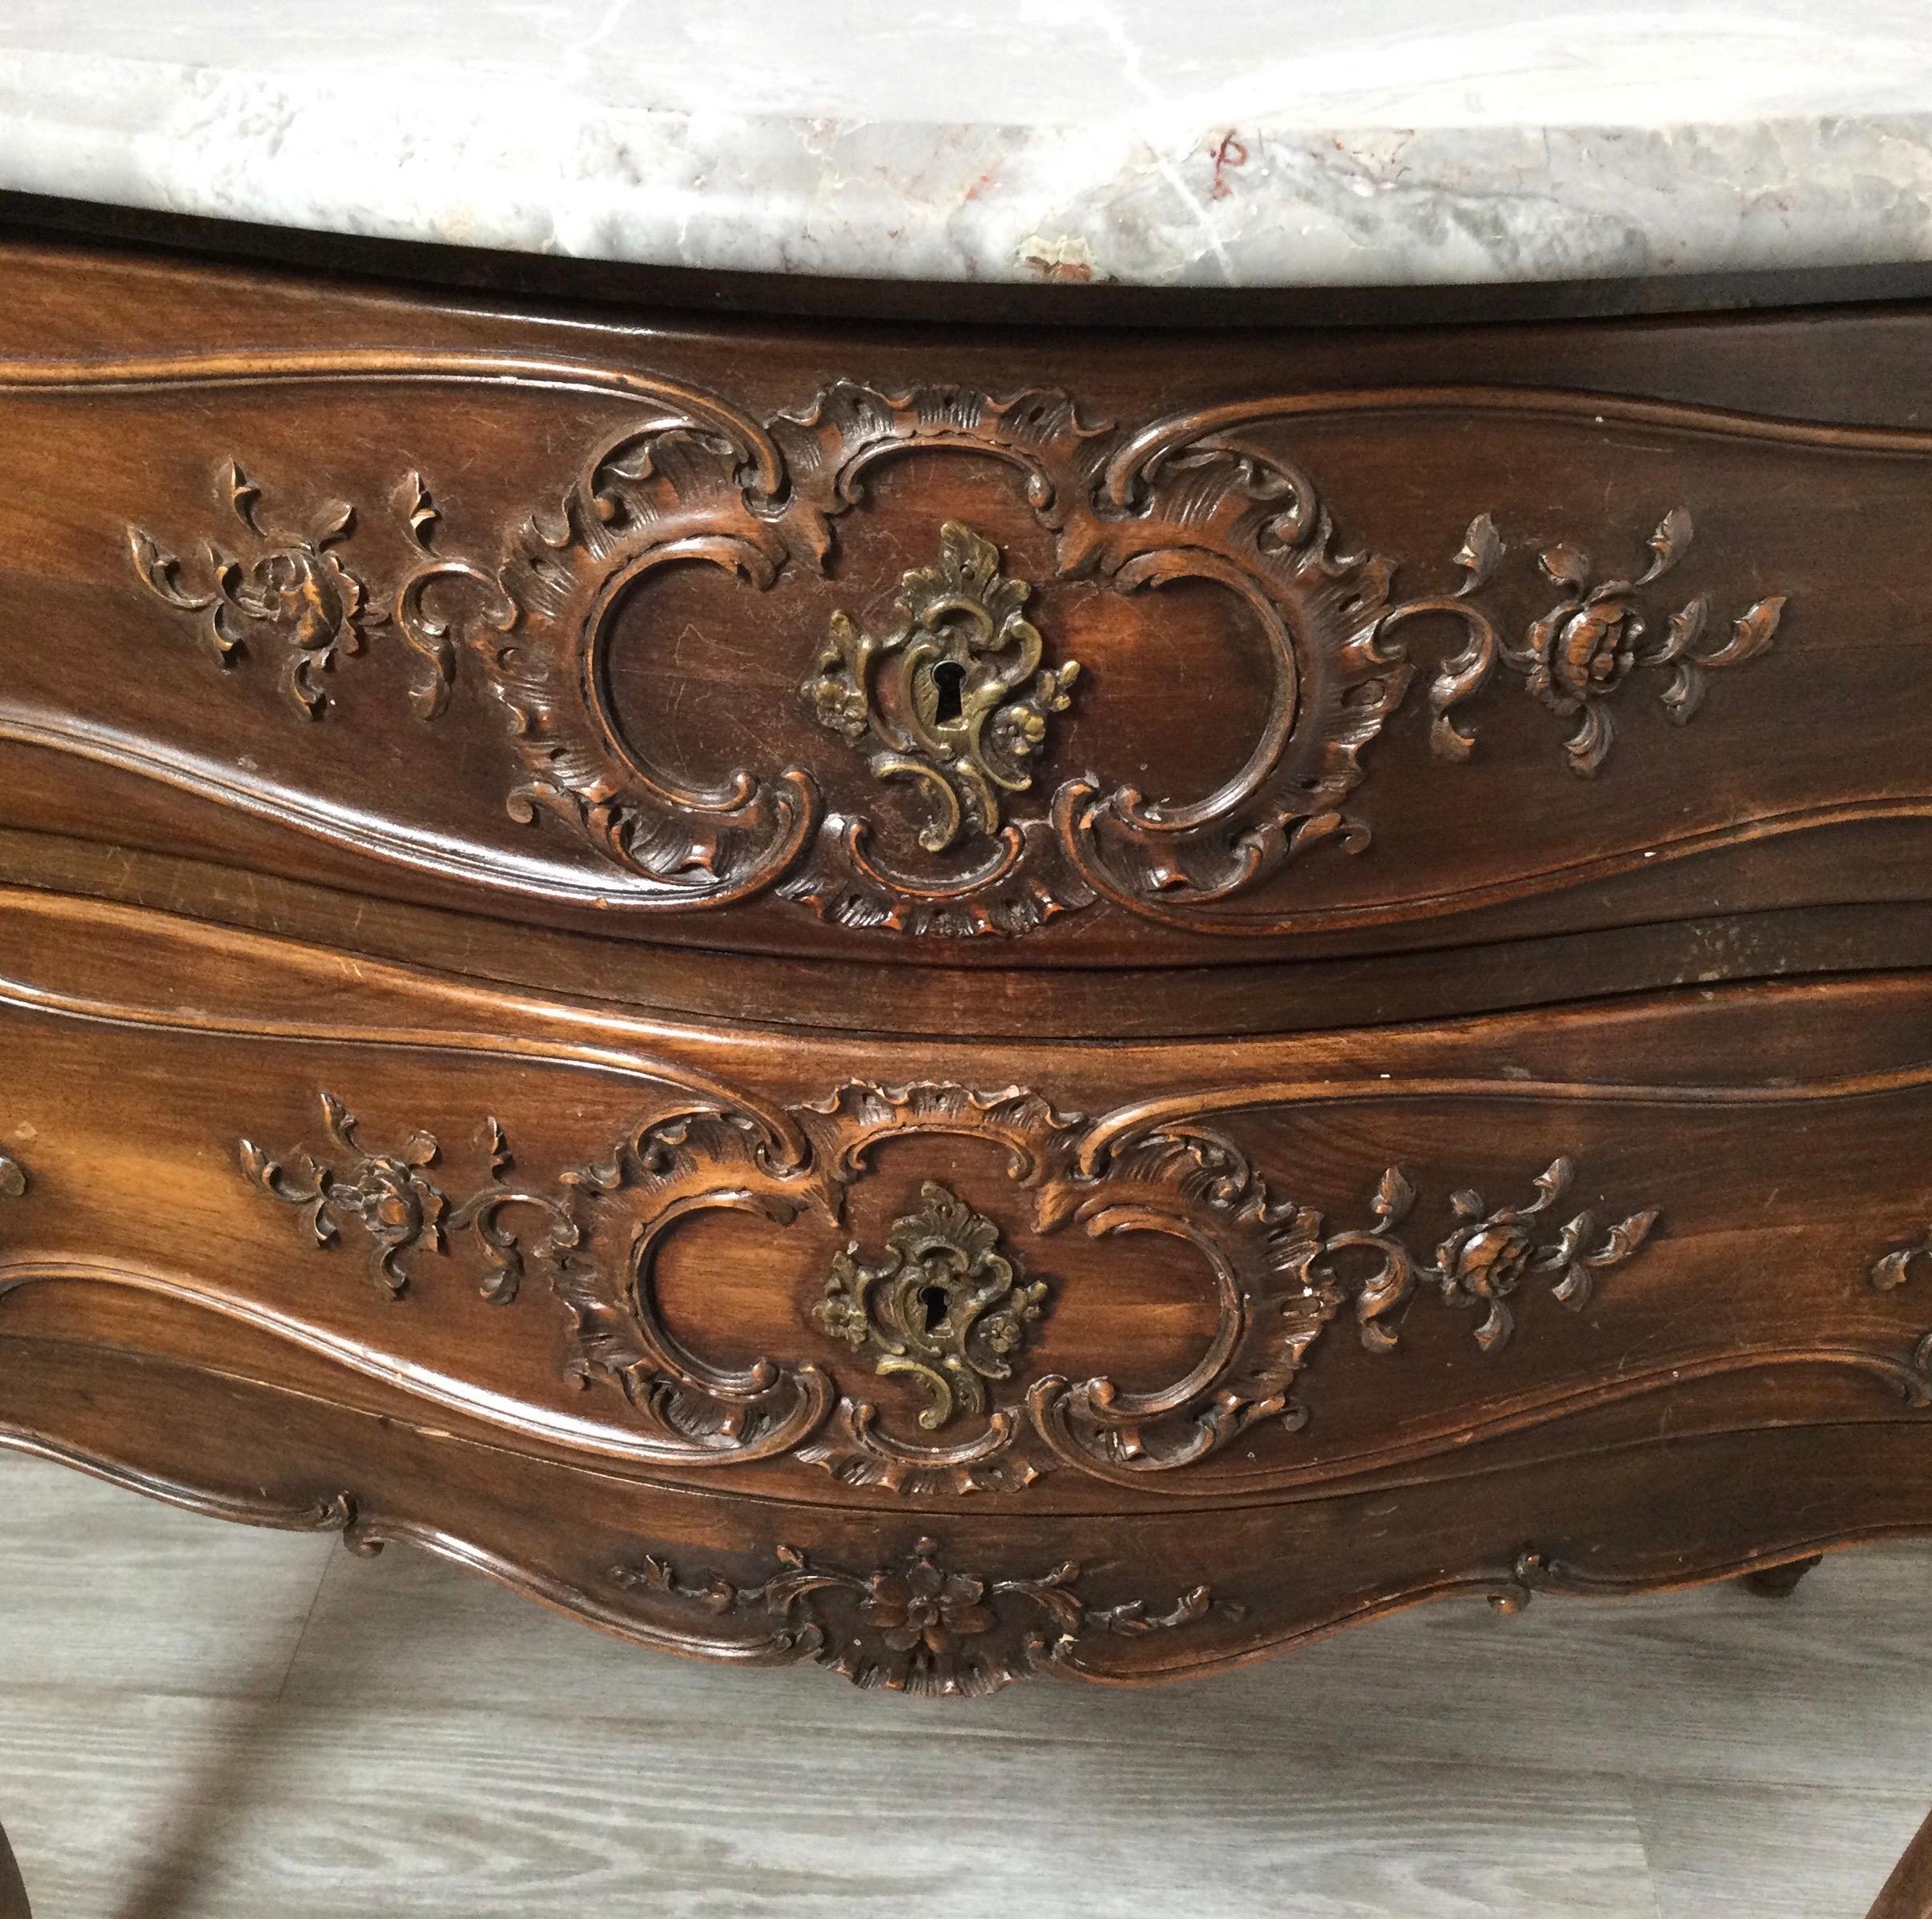 European Country French Carved Walnut Commode Chest with Grey Marble Top